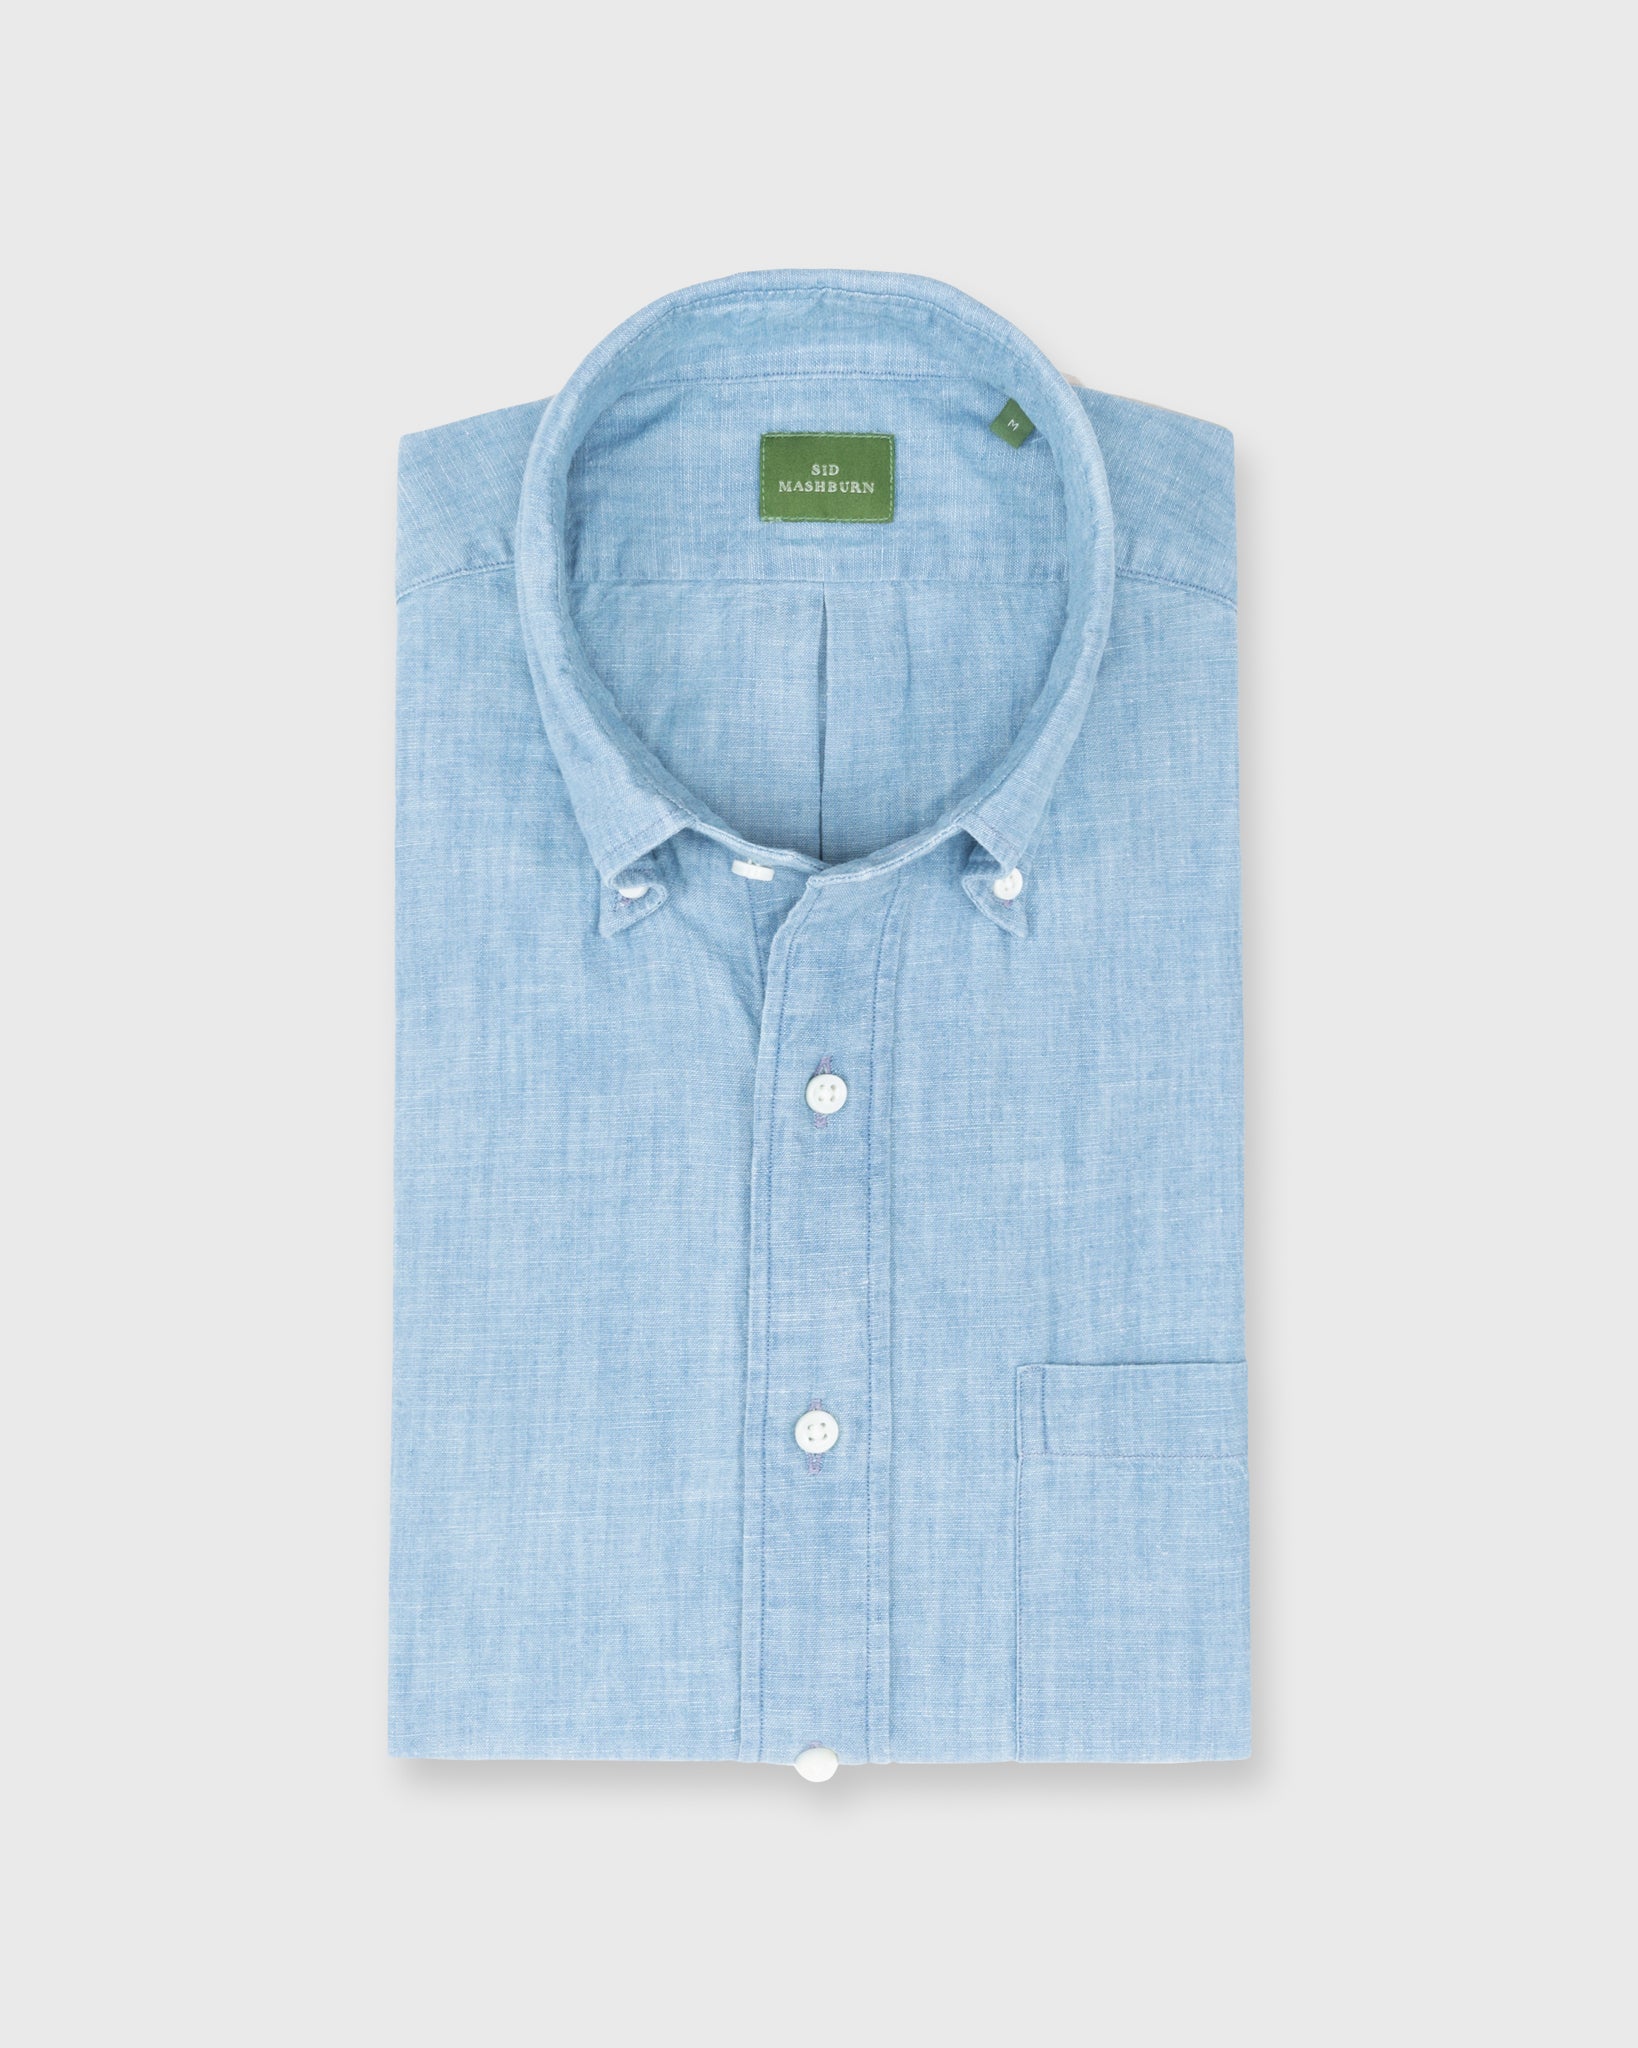 Short-Sleeved Button-Down Sport Shirt in Extra Light Washed Indigo Chambray